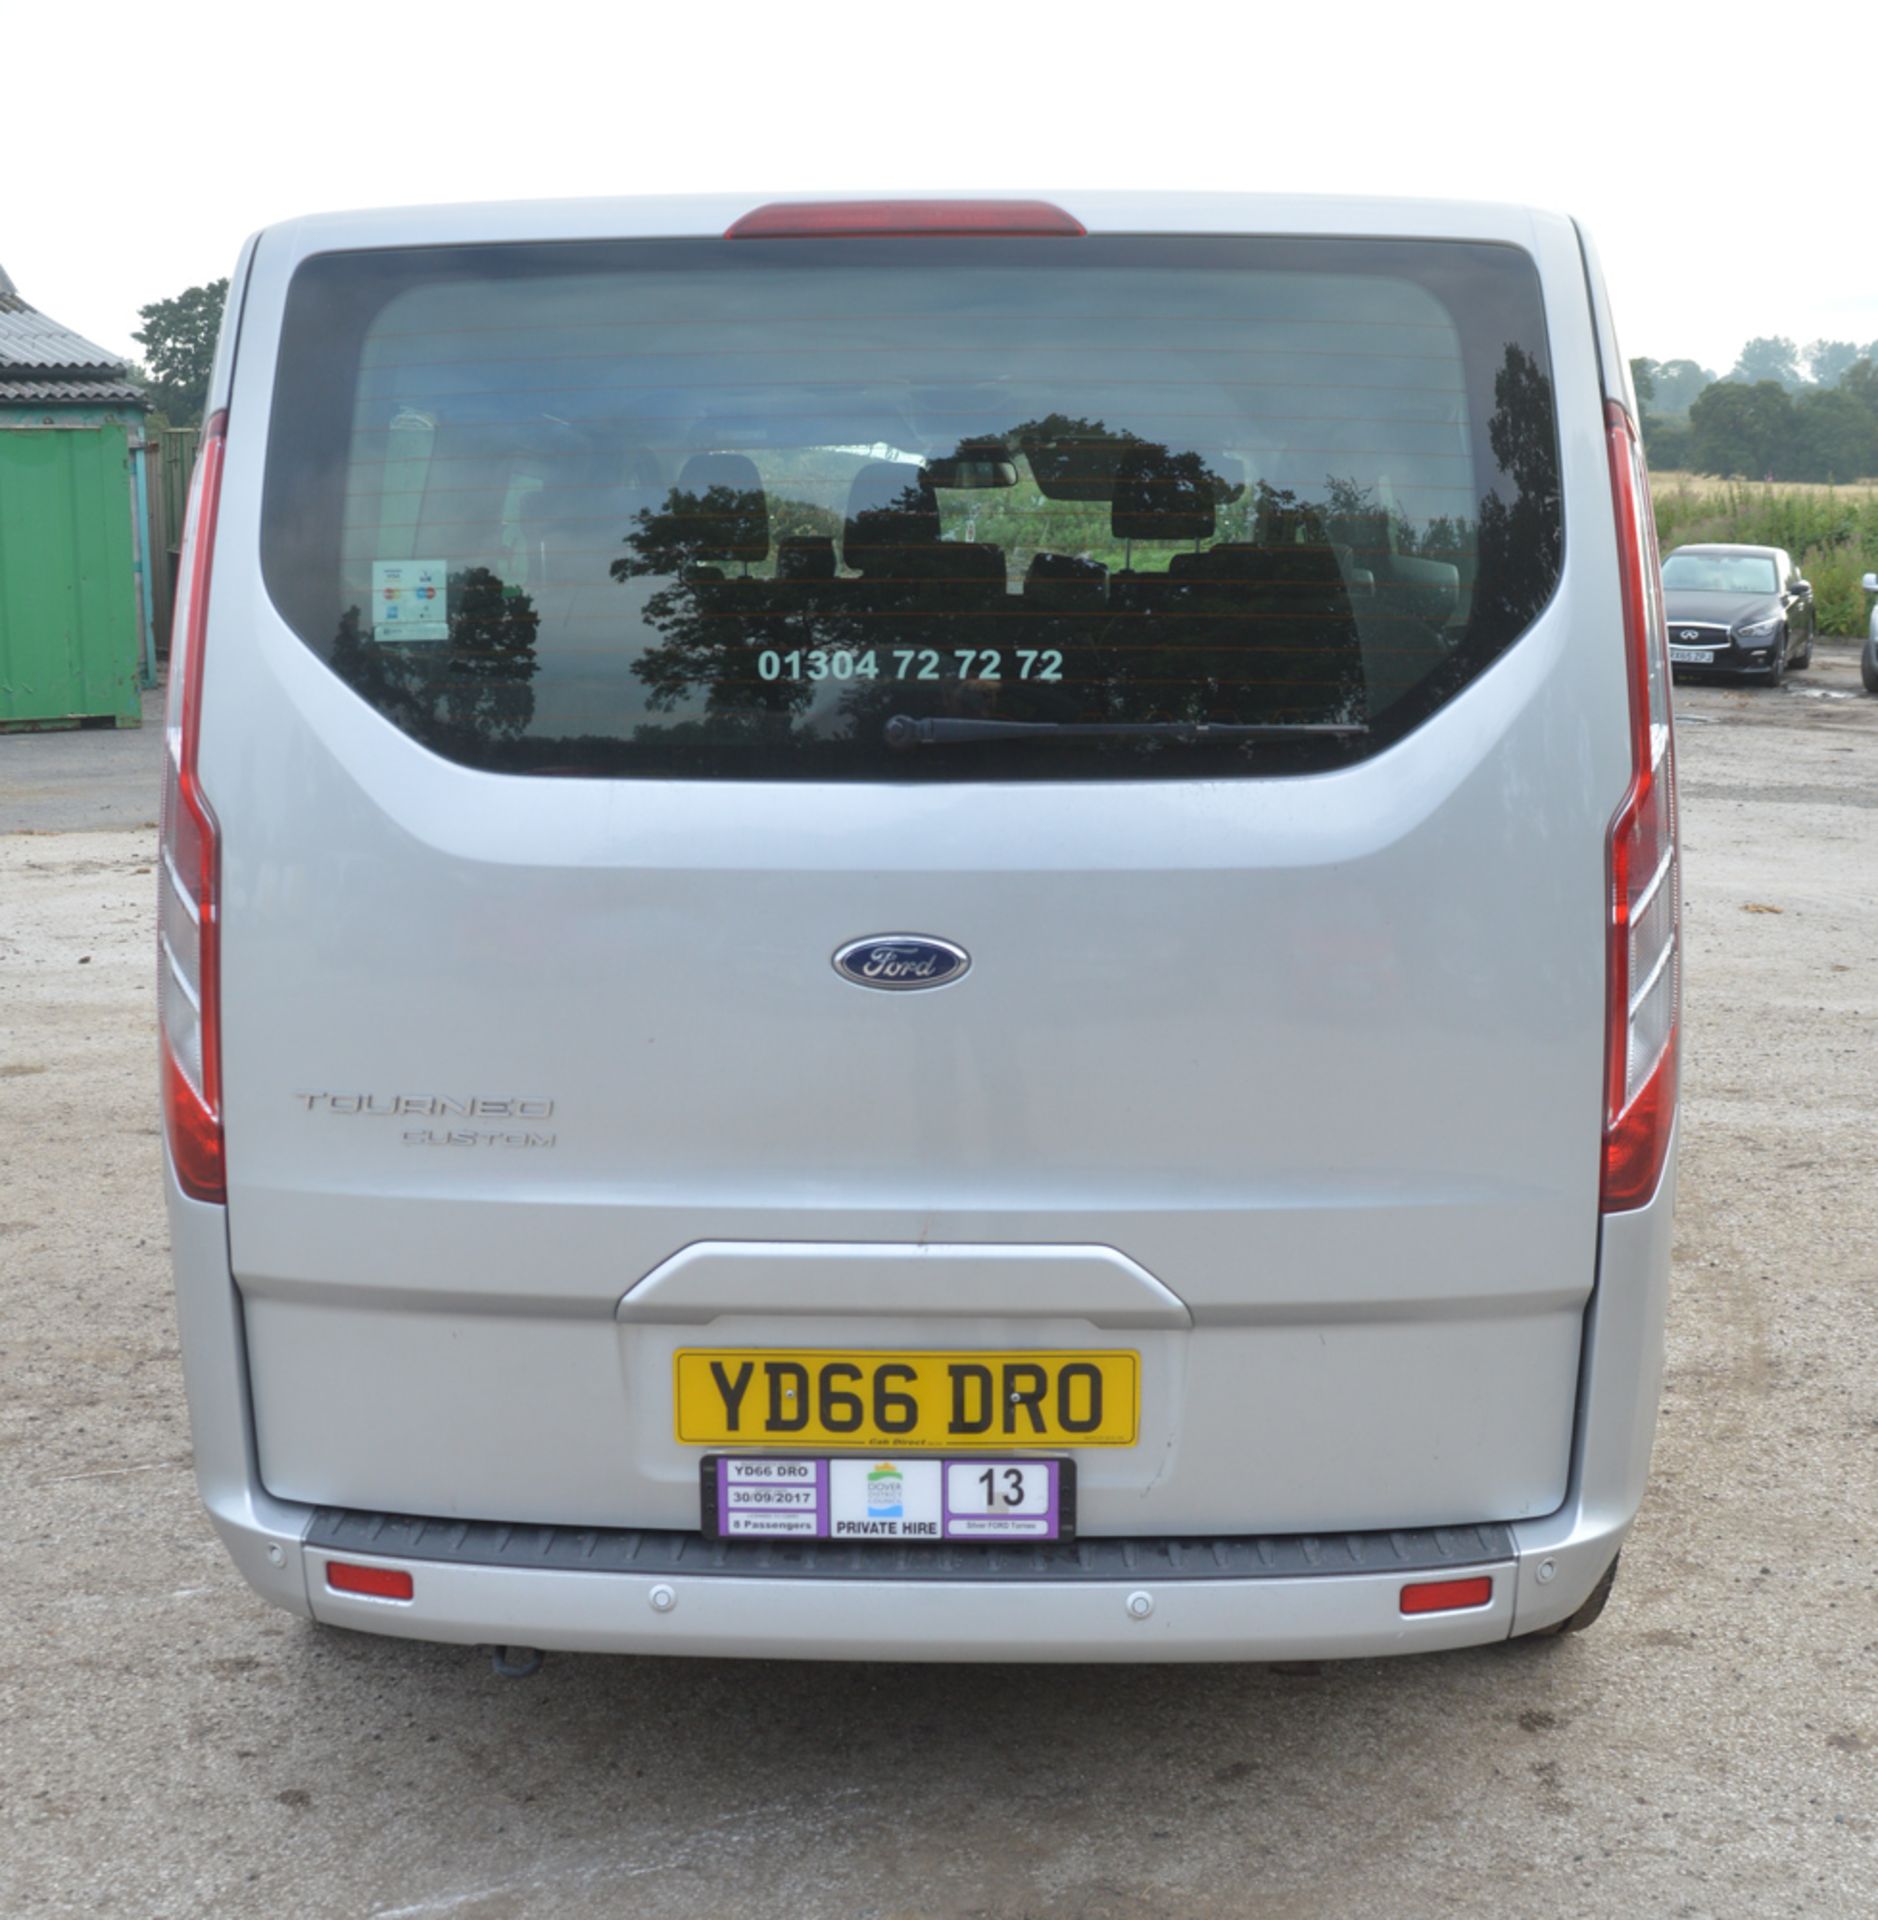 Ford Tourneo Custom 8 seat minibus  Registration Number: YD66 DRO  Date of Registration: 01/09/ - Image 6 of 15